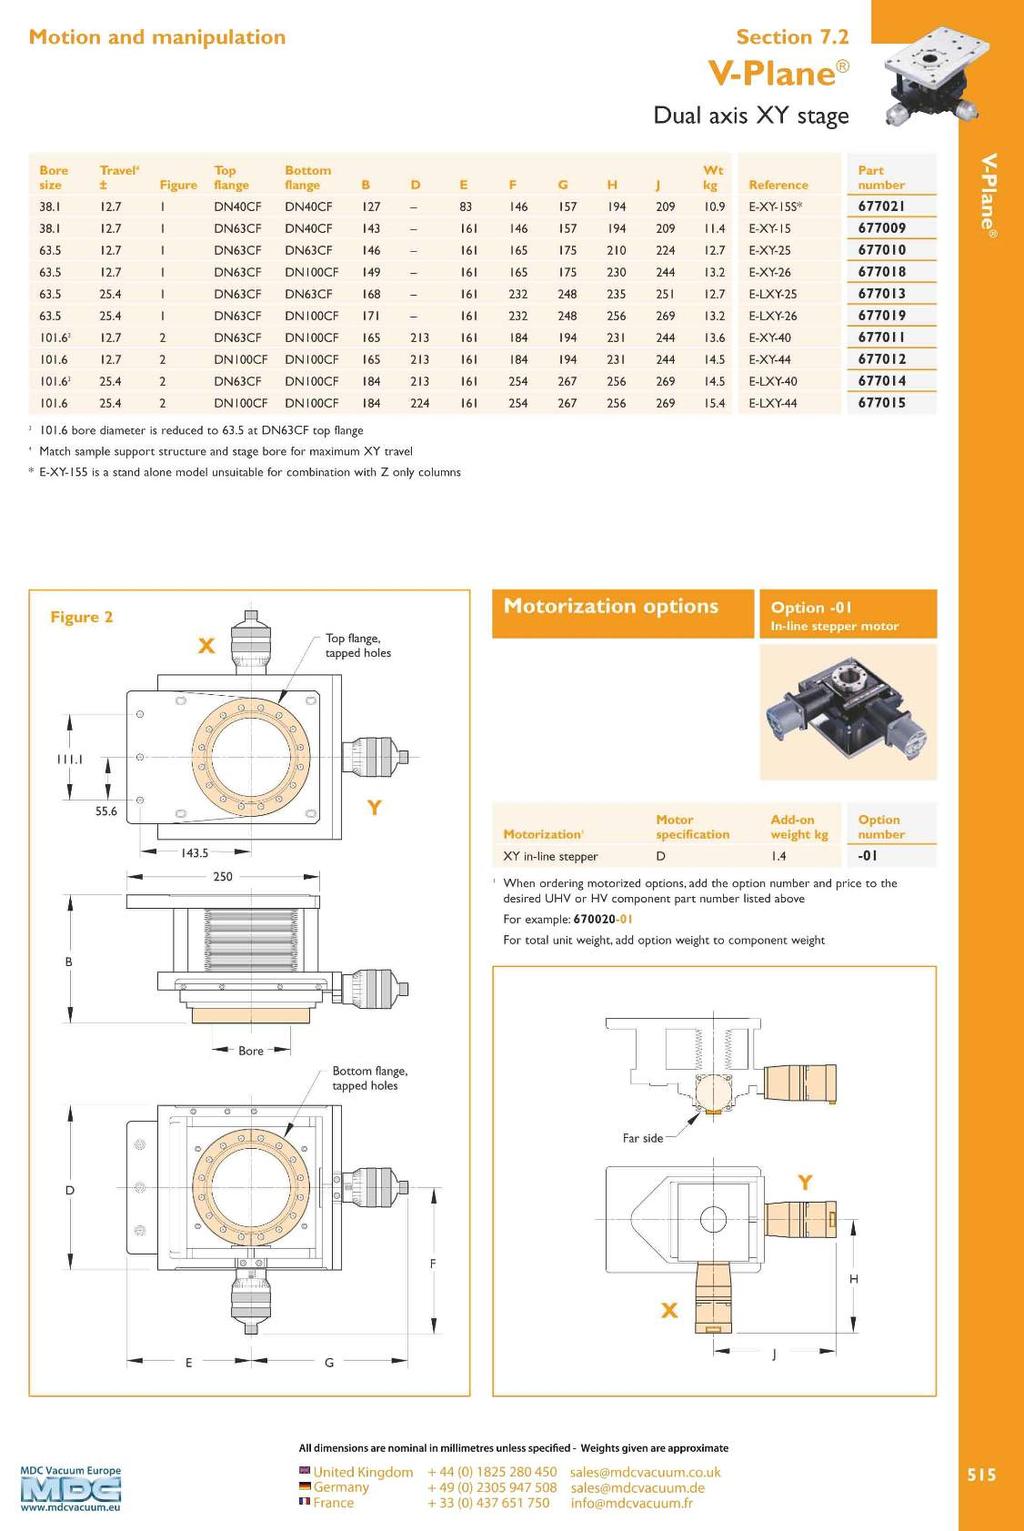 Section 7.2 V-Plane Dual axis XY stage Bore Travel' Tap Bottom Wt size ± Figure flange flange 8 D E F G H kg 38.1 12.7 DN40CF DN40CF 127 83 146 157 194 209.9 E-XY-155* 677021 38. 1 12.